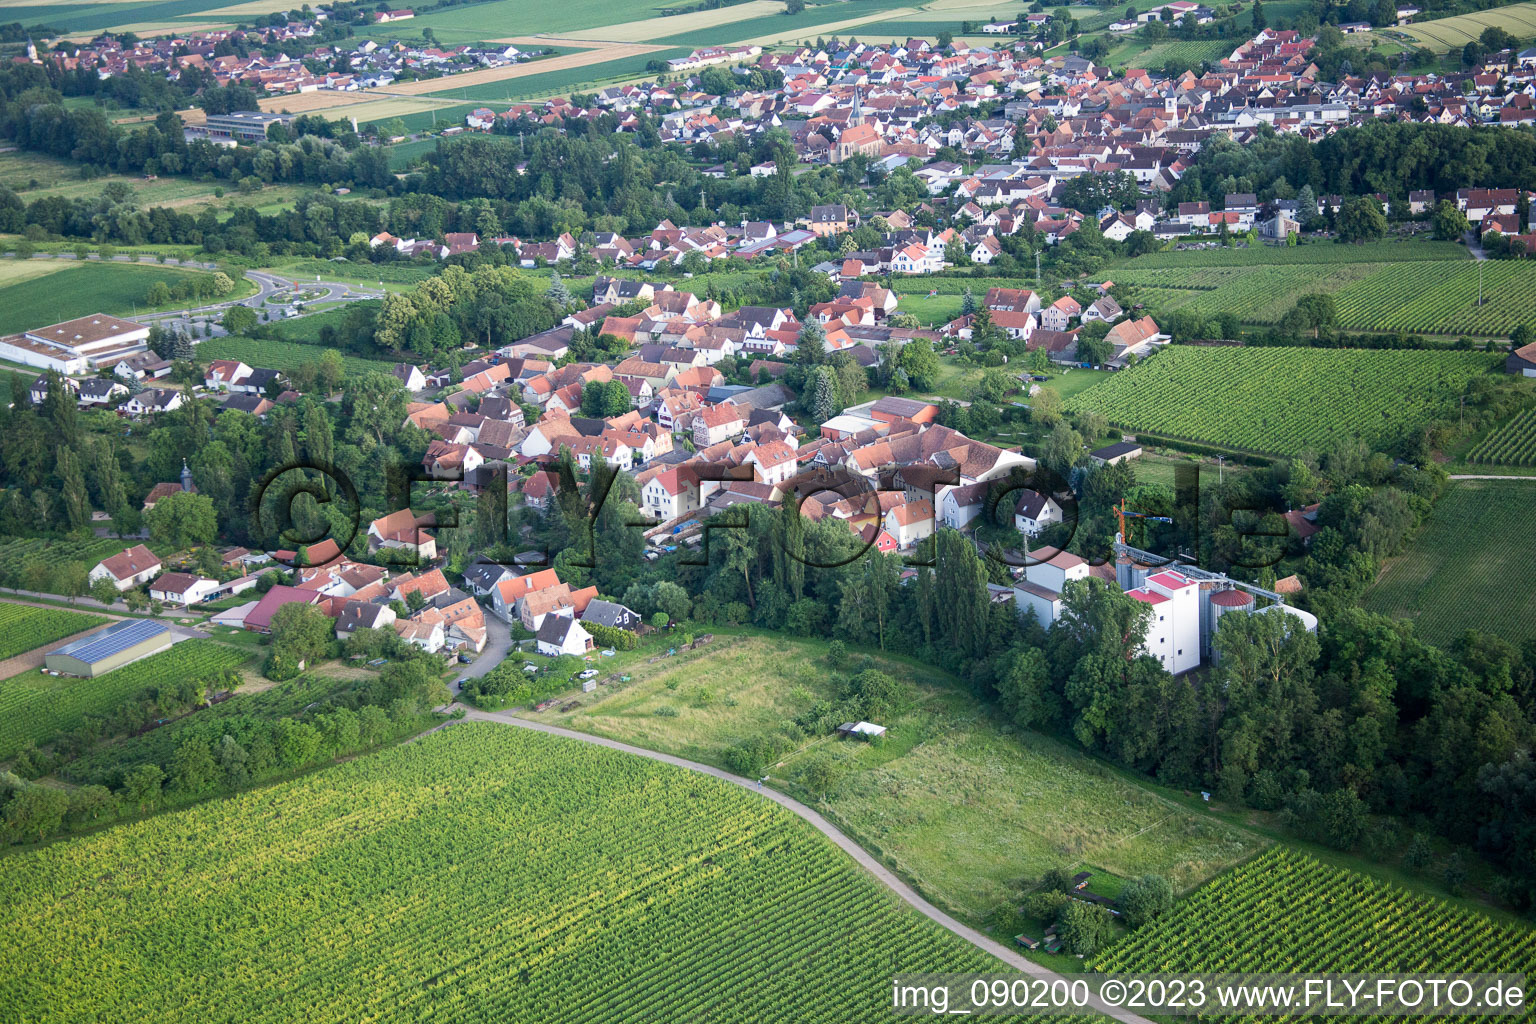 District Appenhofen in Billigheim-Ingenheim in the state Rhineland-Palatinate, Germany from the drone perspective